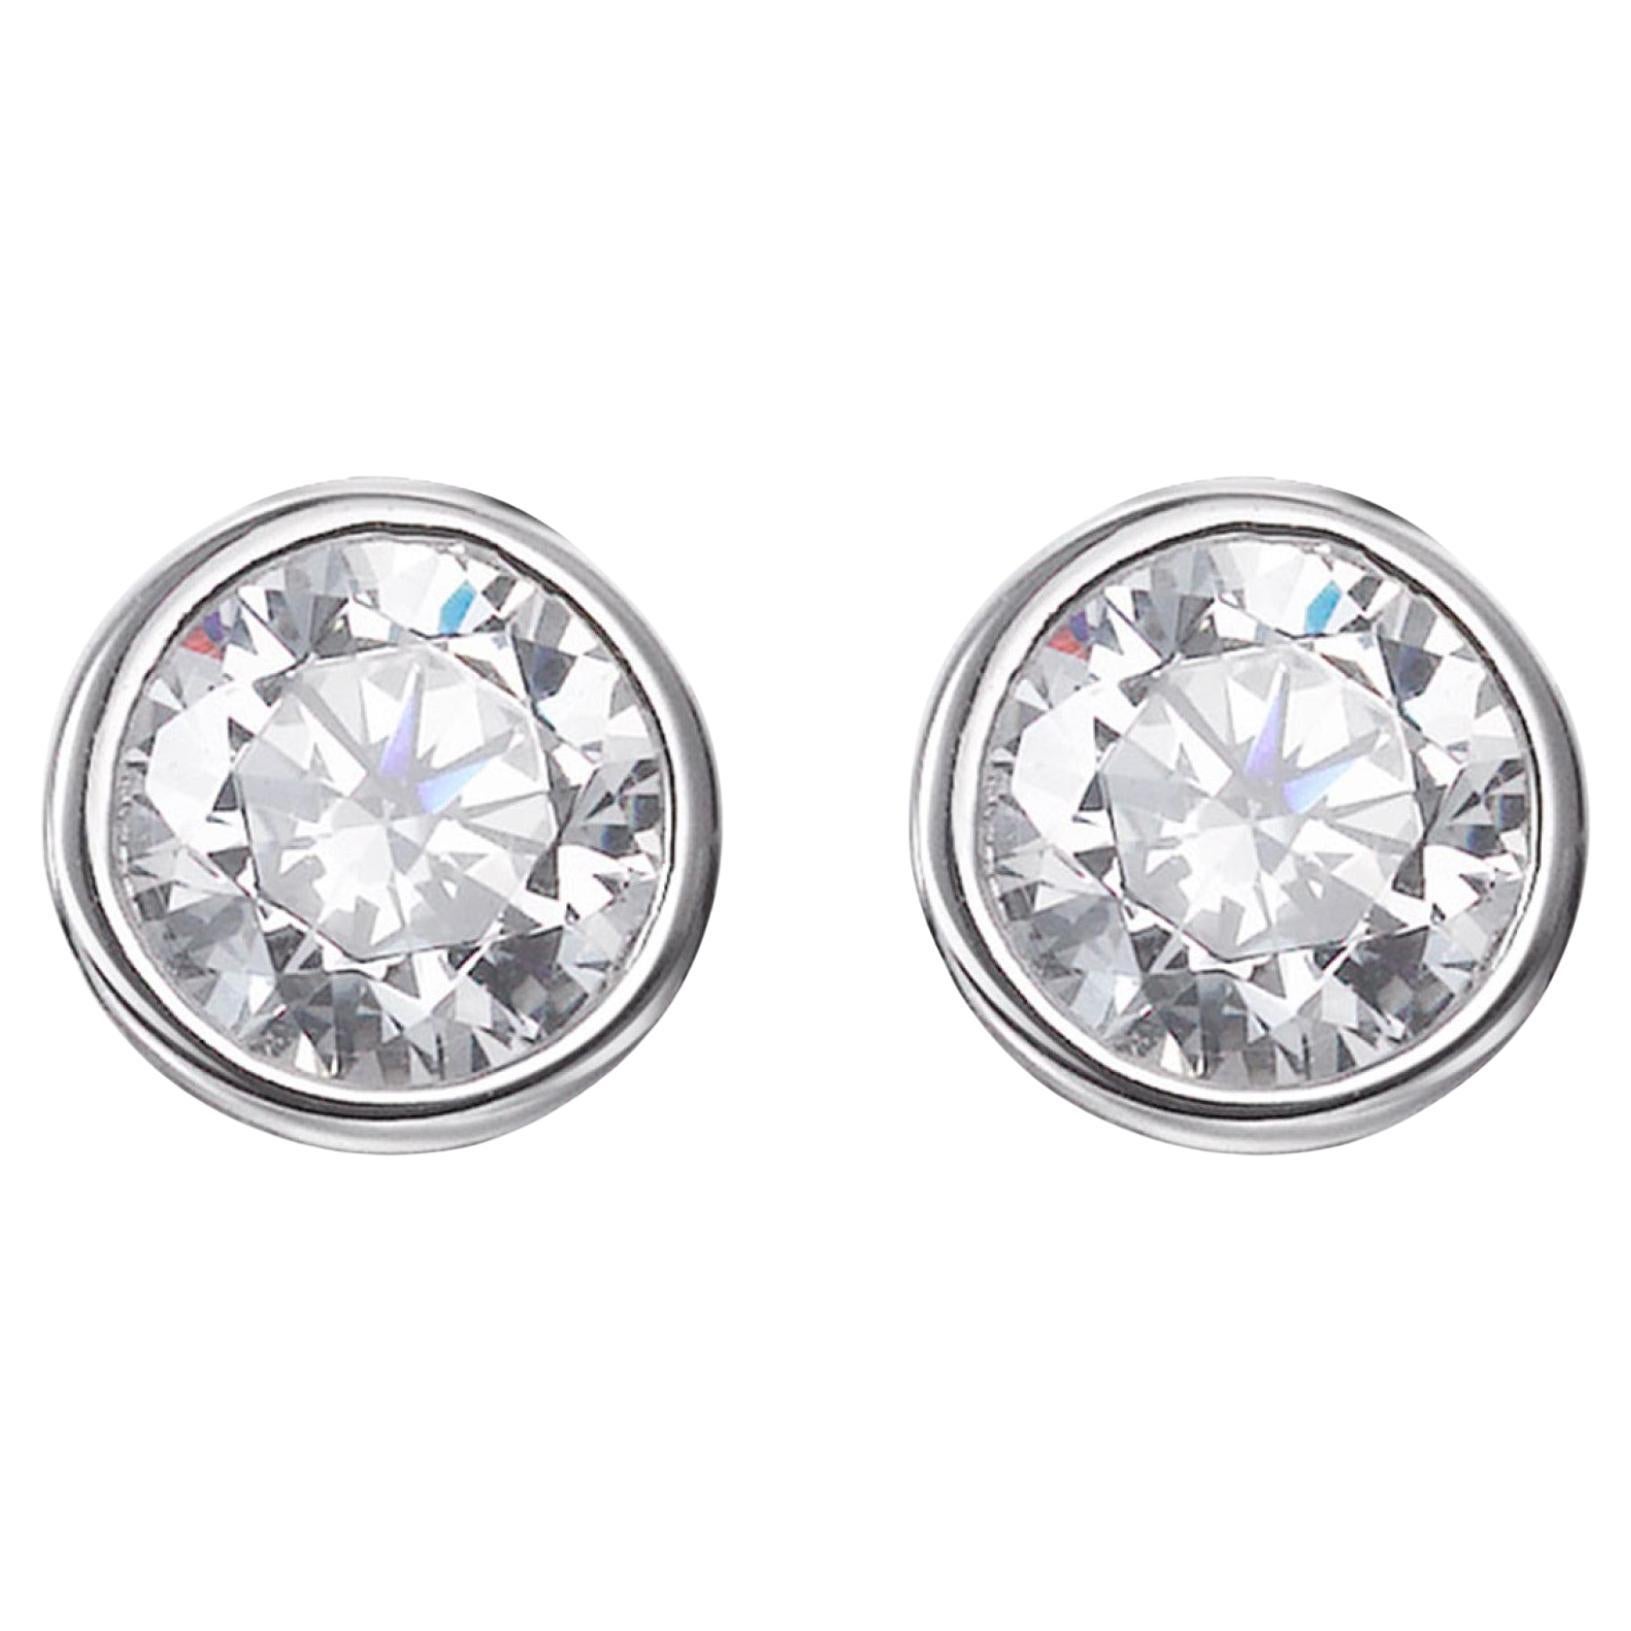 1.53ct Rub Over Set Cubic Zirconia Stud Earrings in Rhodium Plated Silver